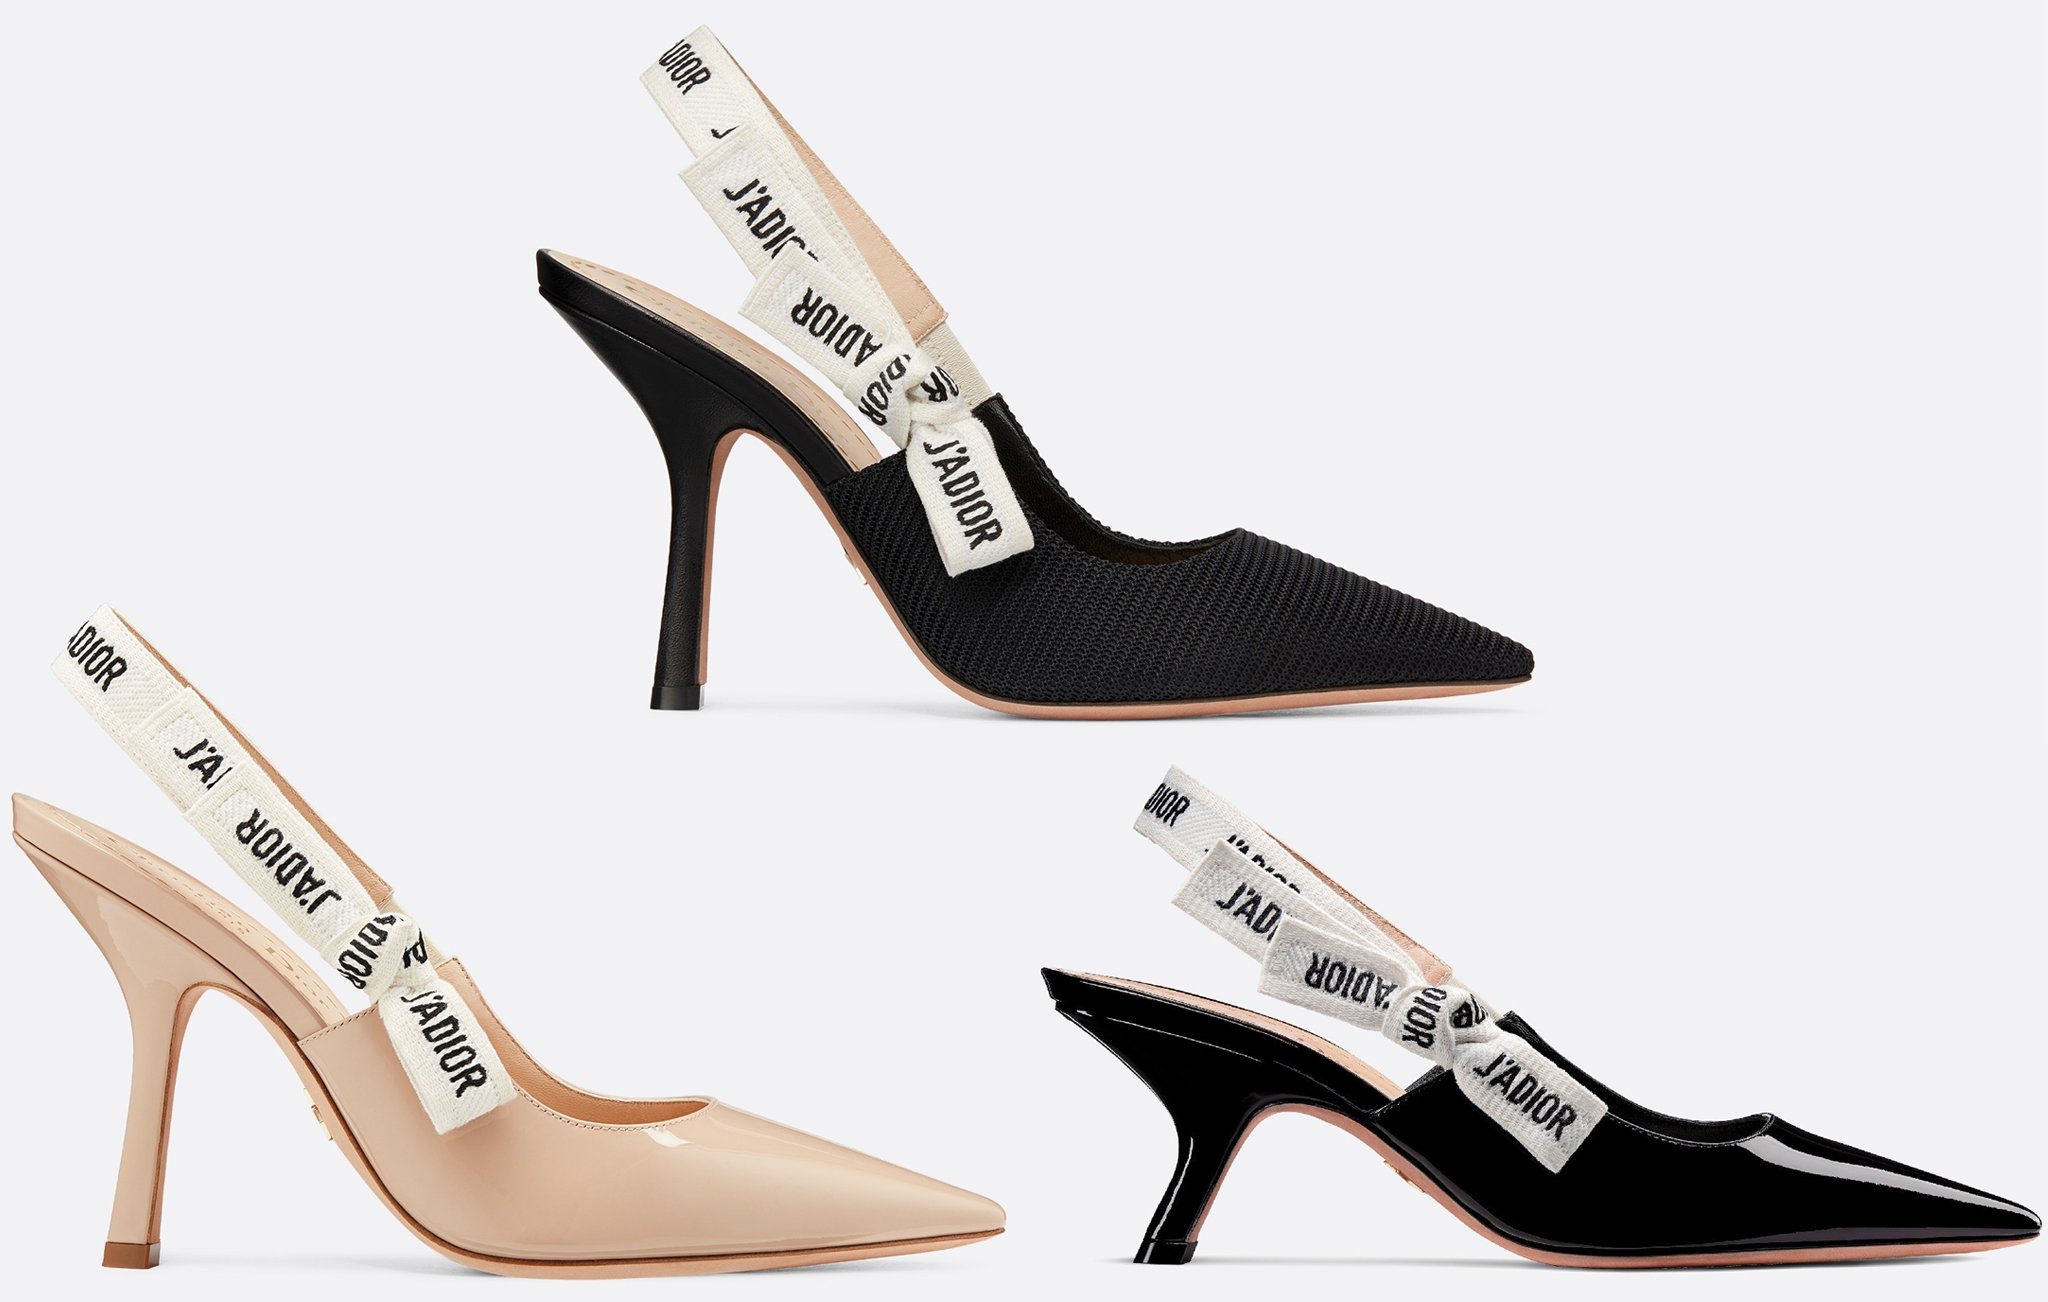 The J'Adior pumps are defined by the flat and unbendable logo-detailed ribbon